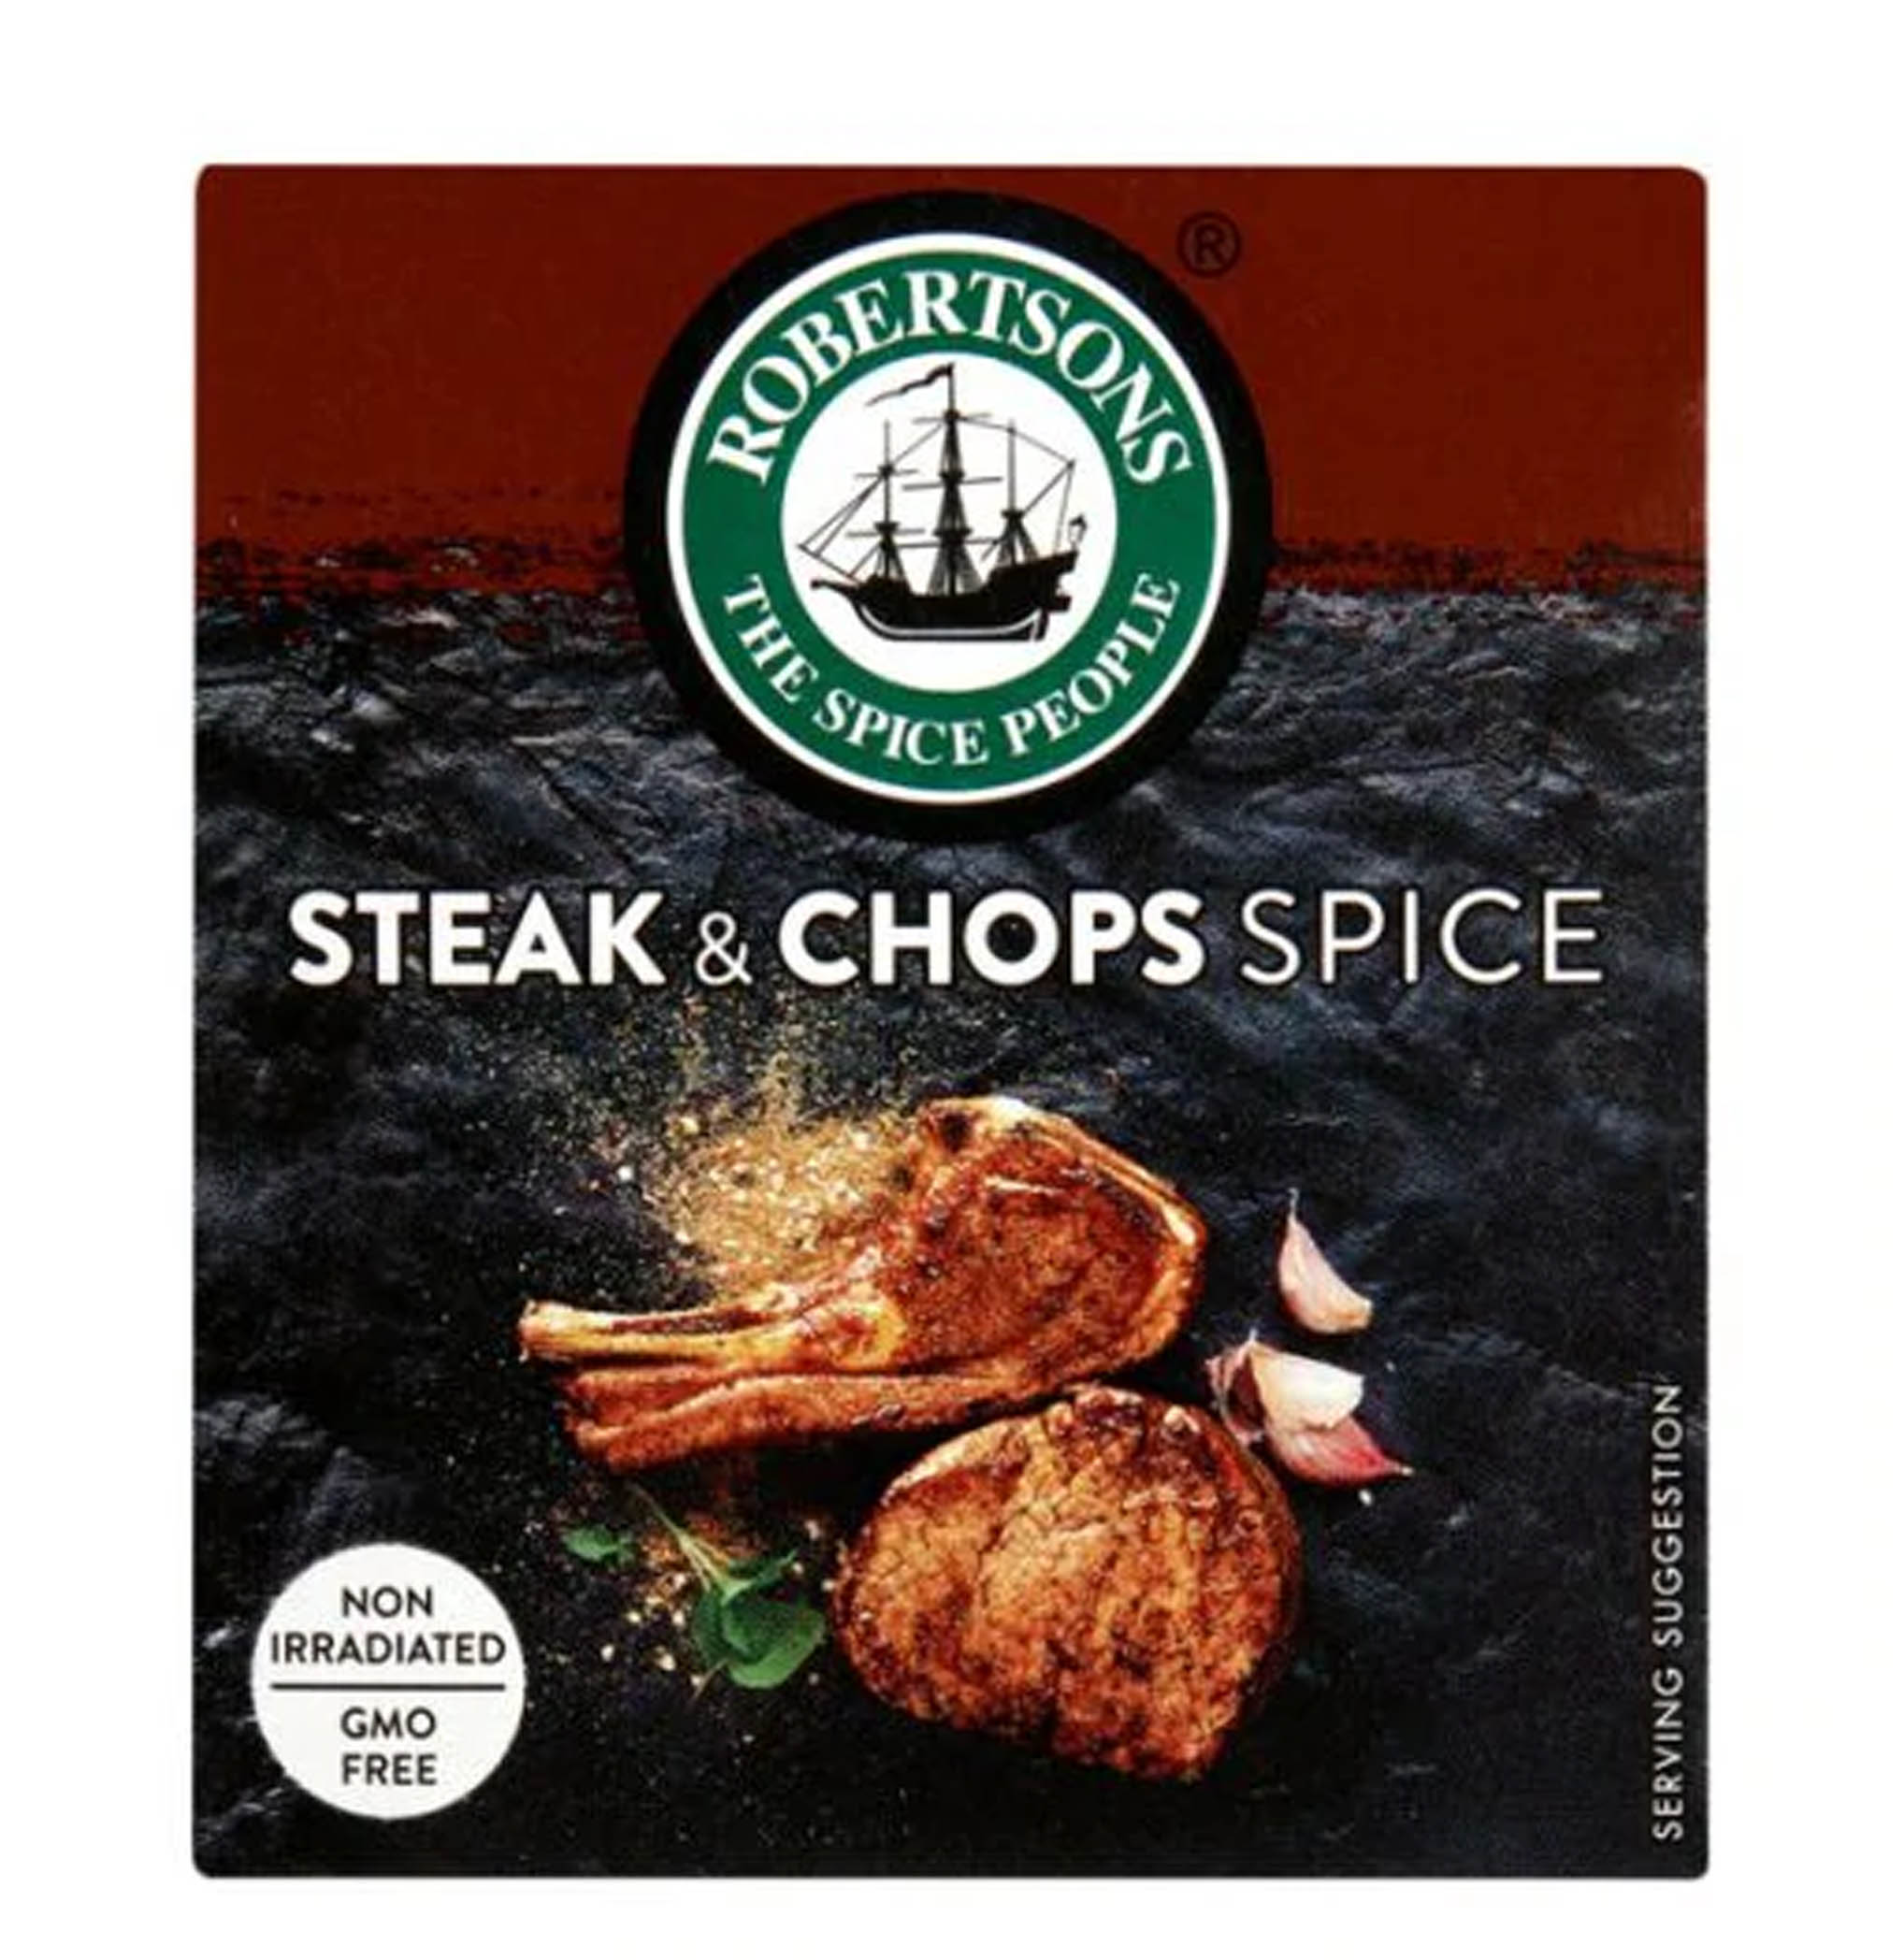 Robertsons Steak And Chops Spice